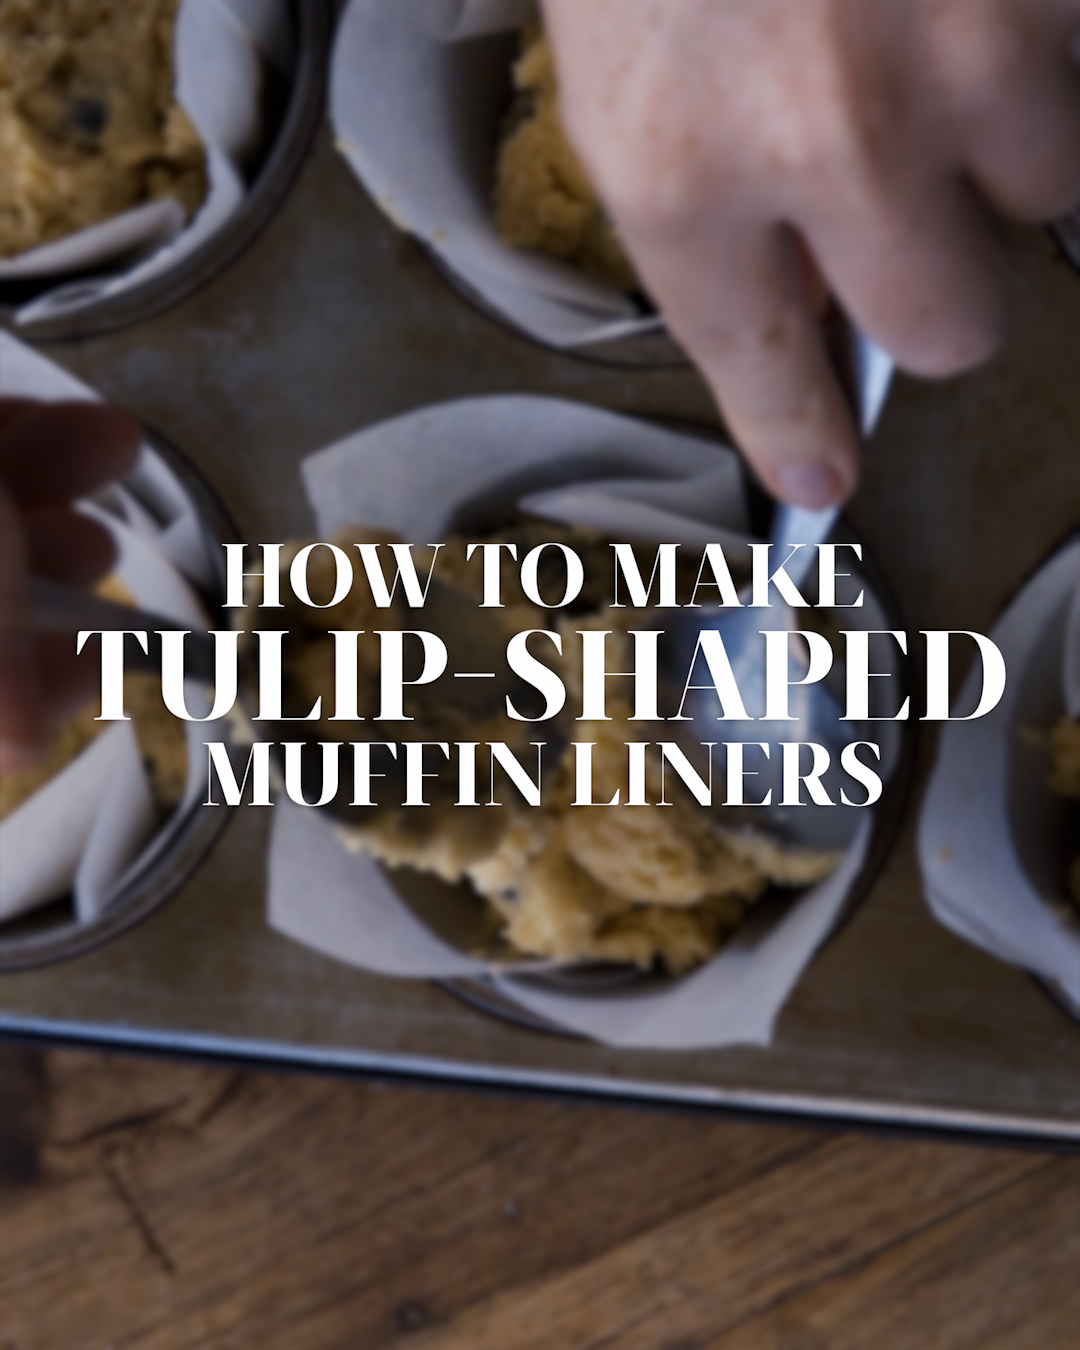 https://www.foodandhome.co.za/wp-content/uploads/2022/06/FH-DIY-Muffin-Liners.jpg